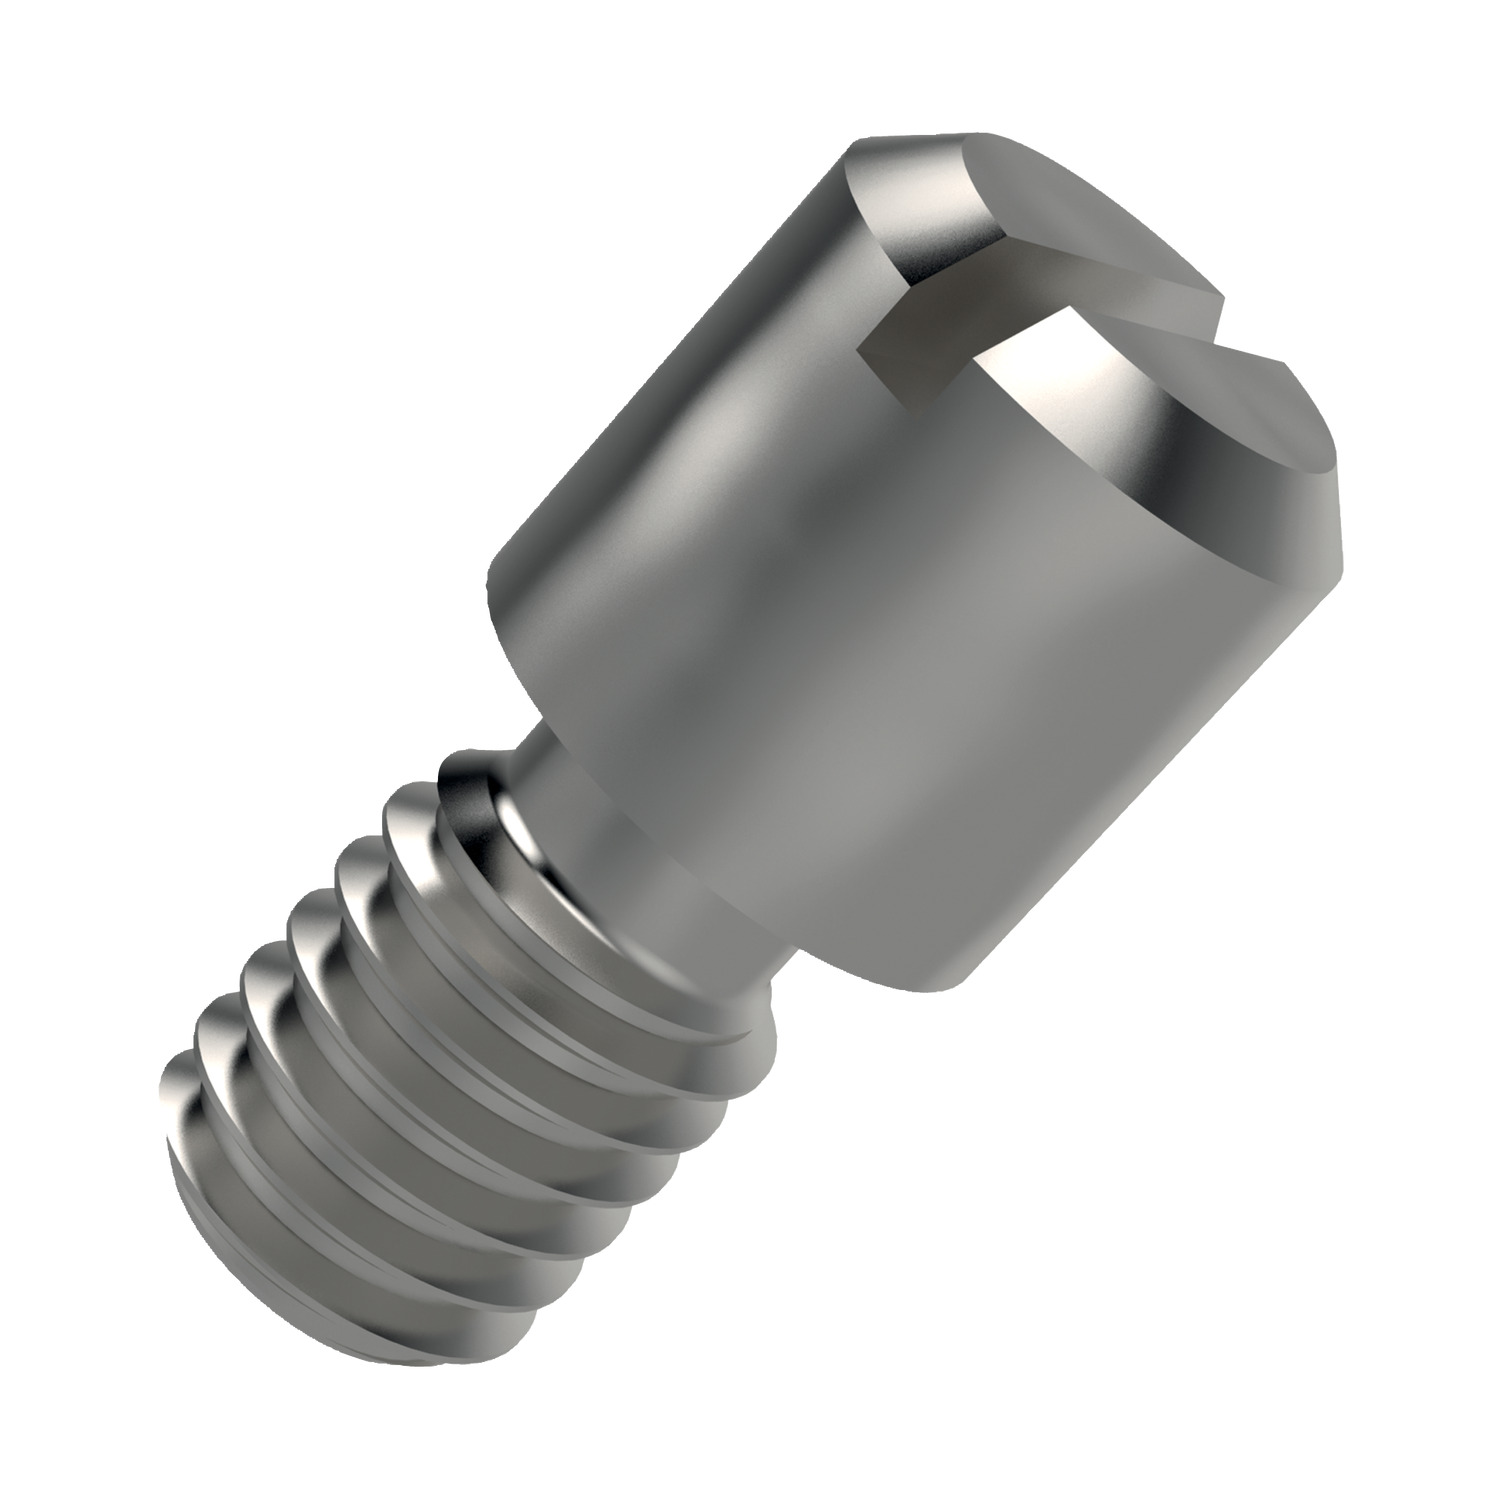 Product P0126.A2, Shoulder Screws - Headless slot drive - 303 stainless / 